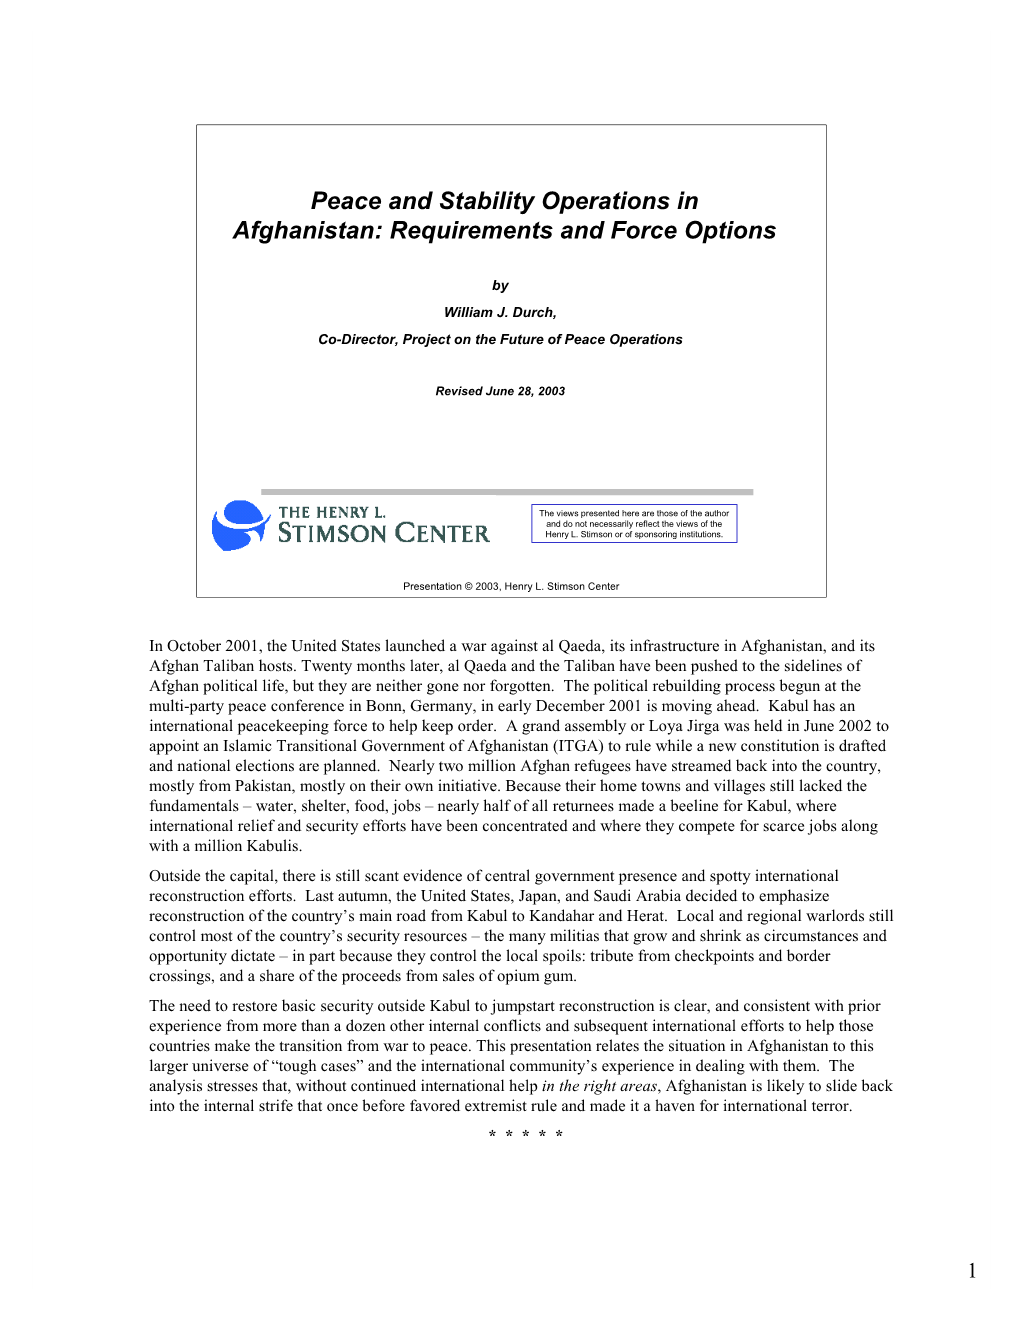 Peace and Stability Operations in Afghanistan: Requirements and Force Options